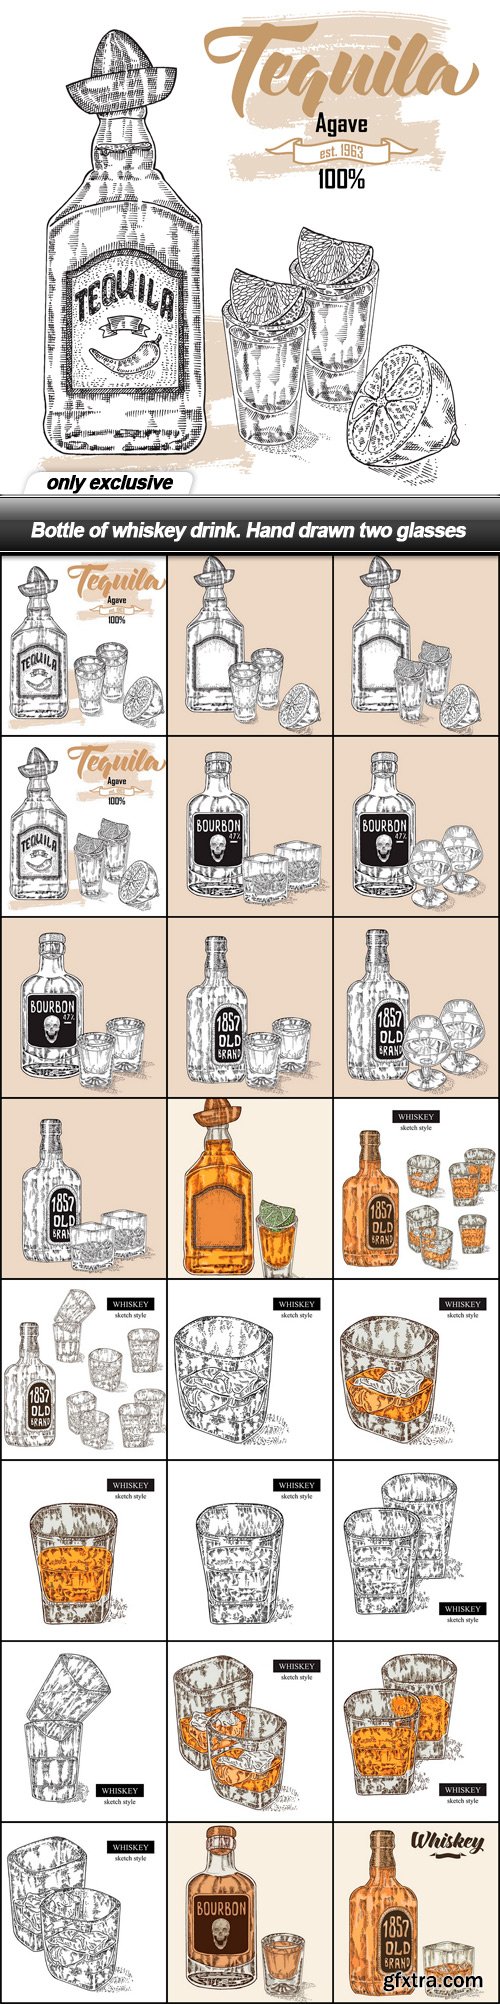 Bottle of whiskey drink. Hand drawn two glasses - 24 EPS